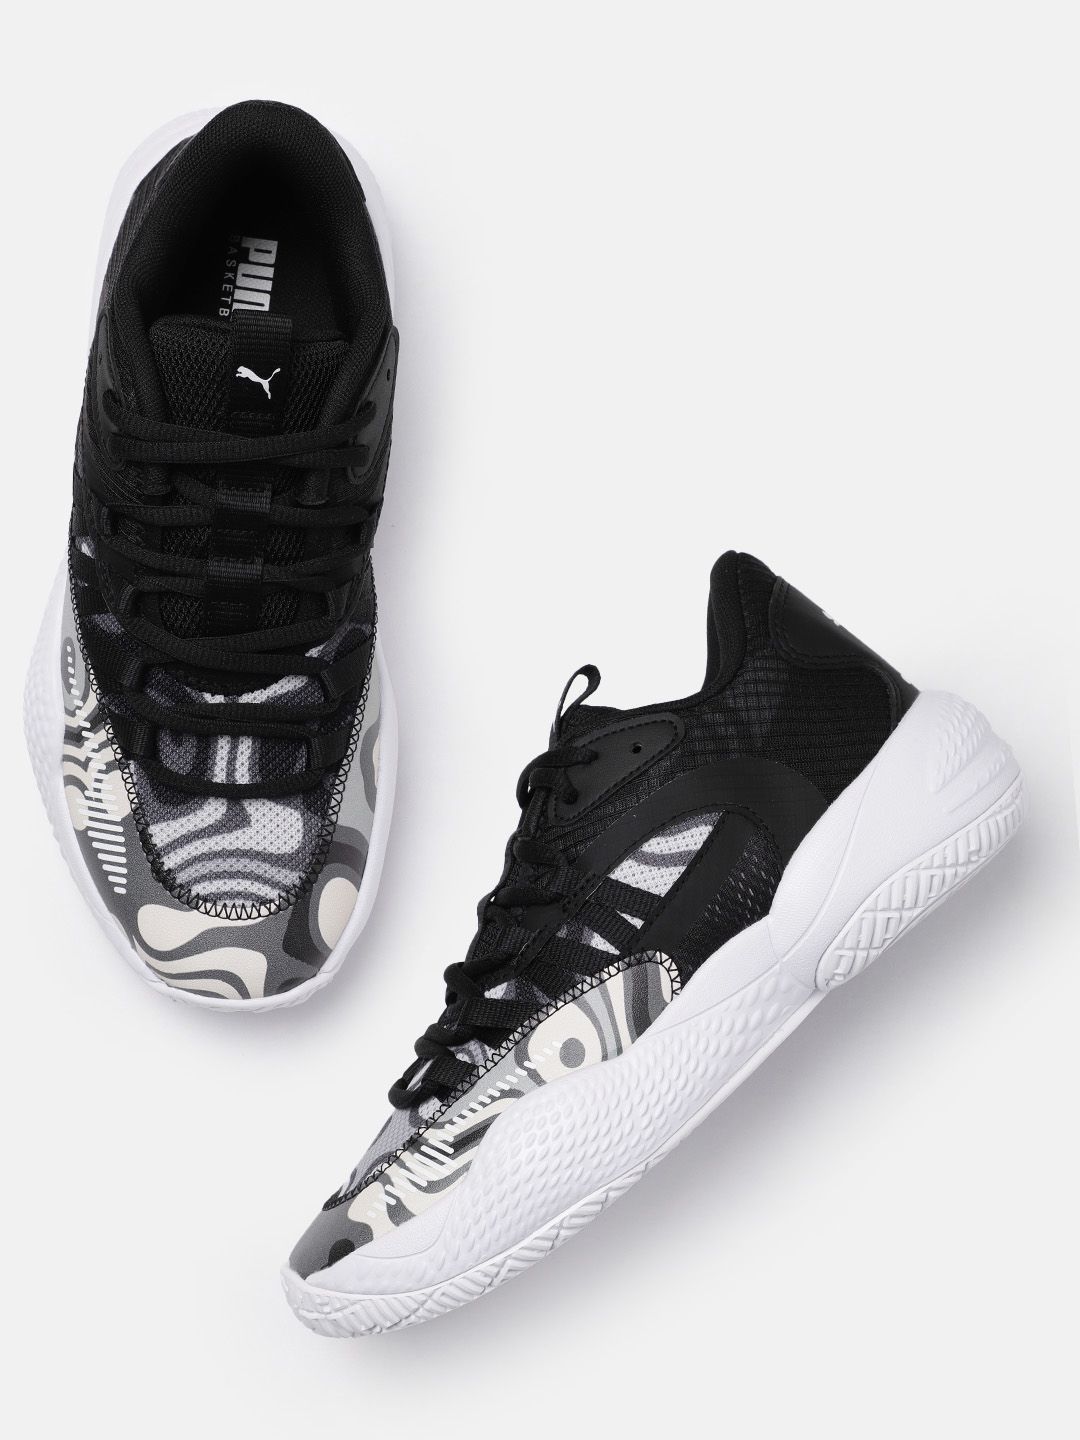 Puma Unisex Court Rider 2.0 Lava Basketball Shoes Price in India